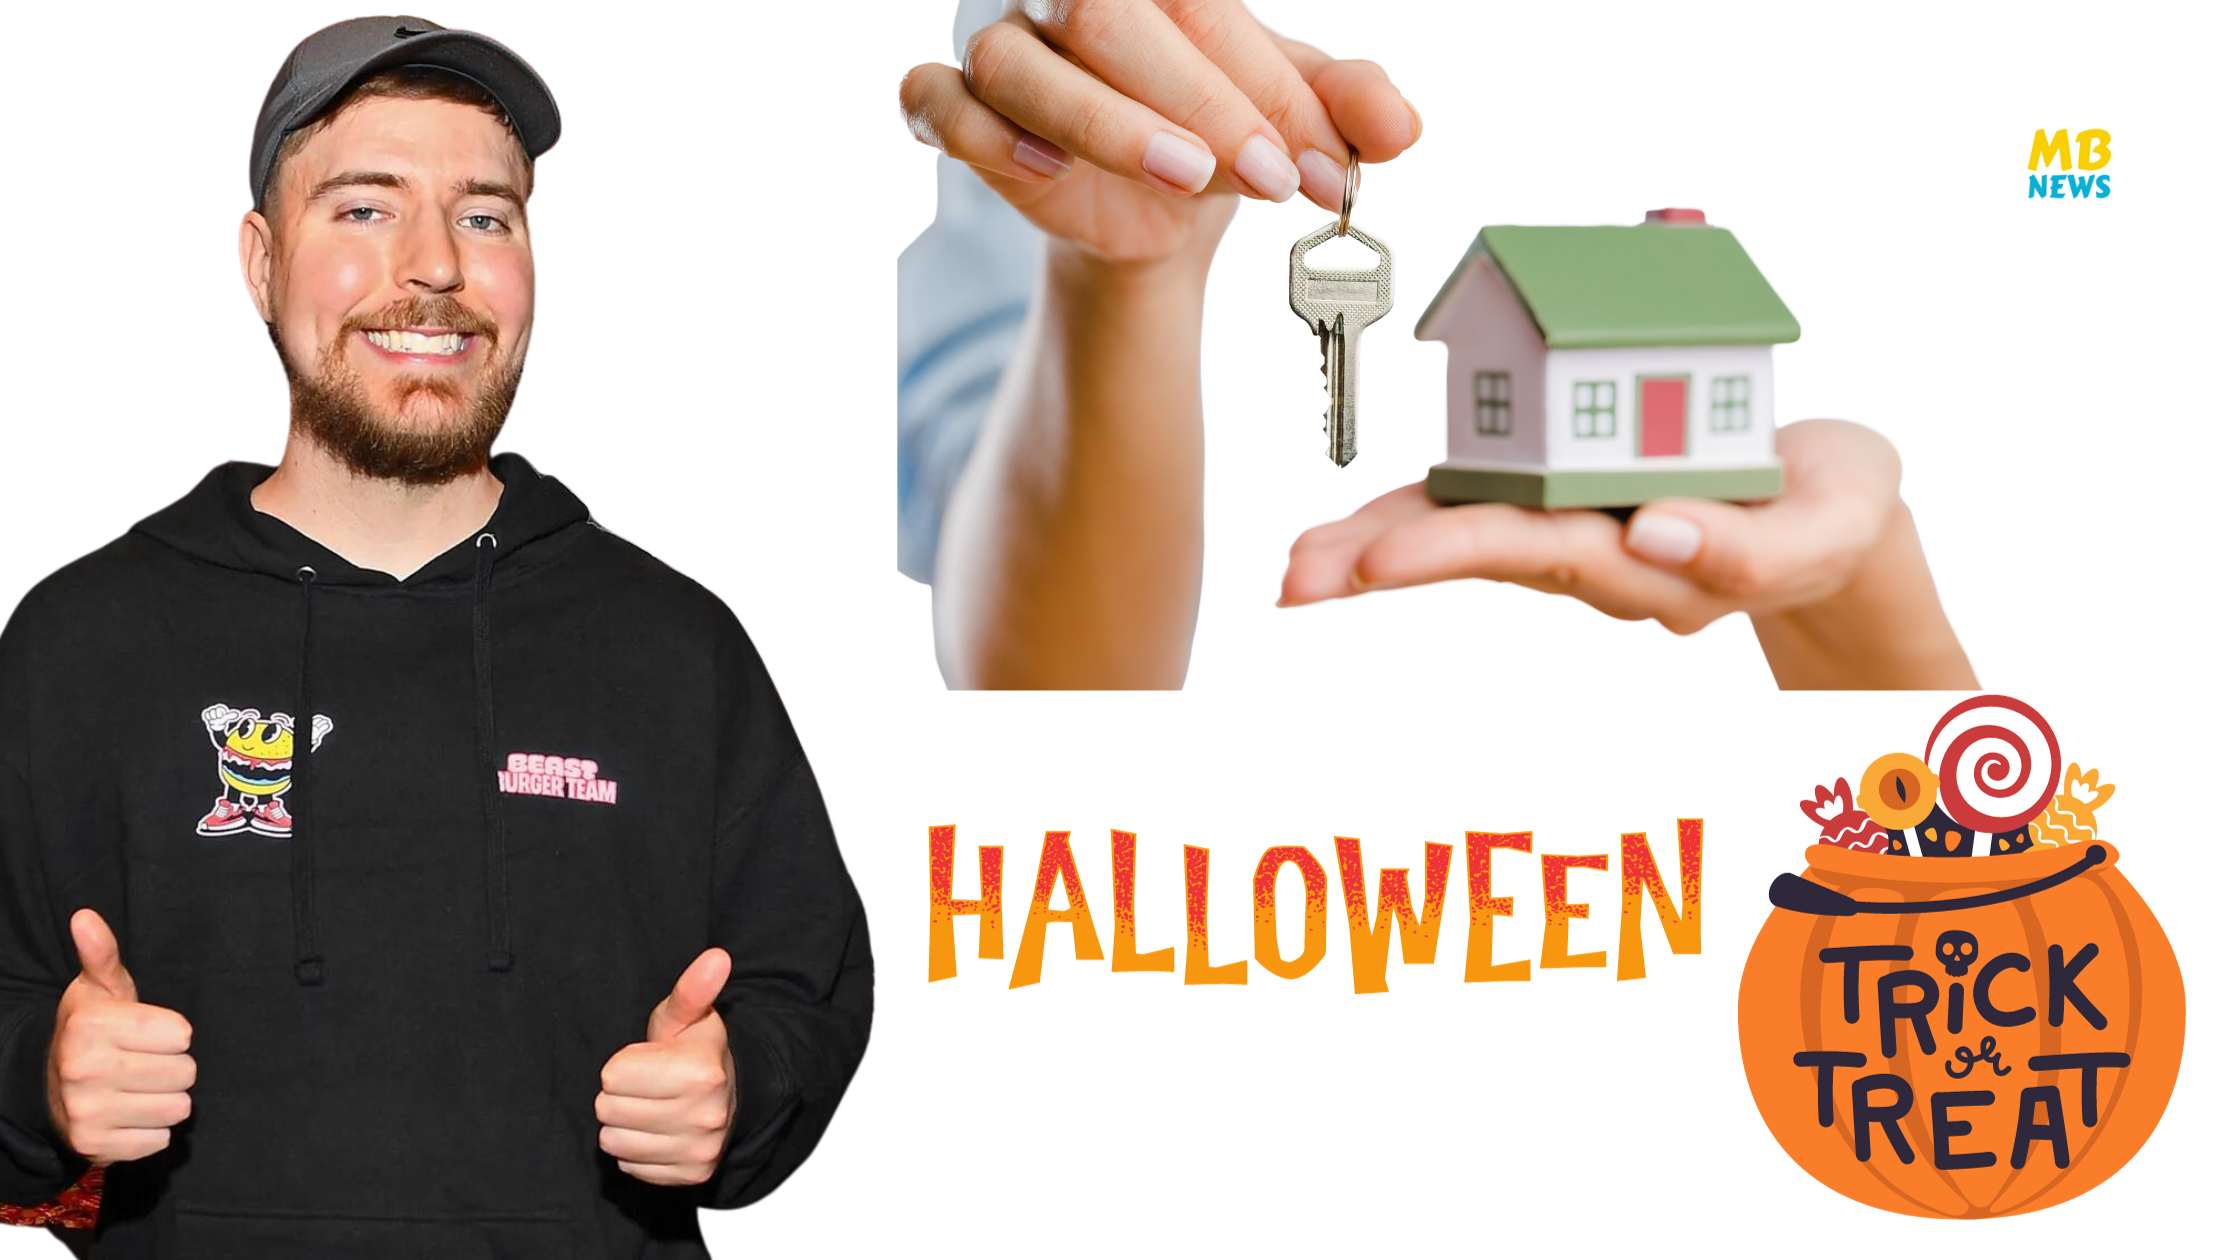 MrBeast Surprises Trick-or-Treater with Keys to a House on Halloween!